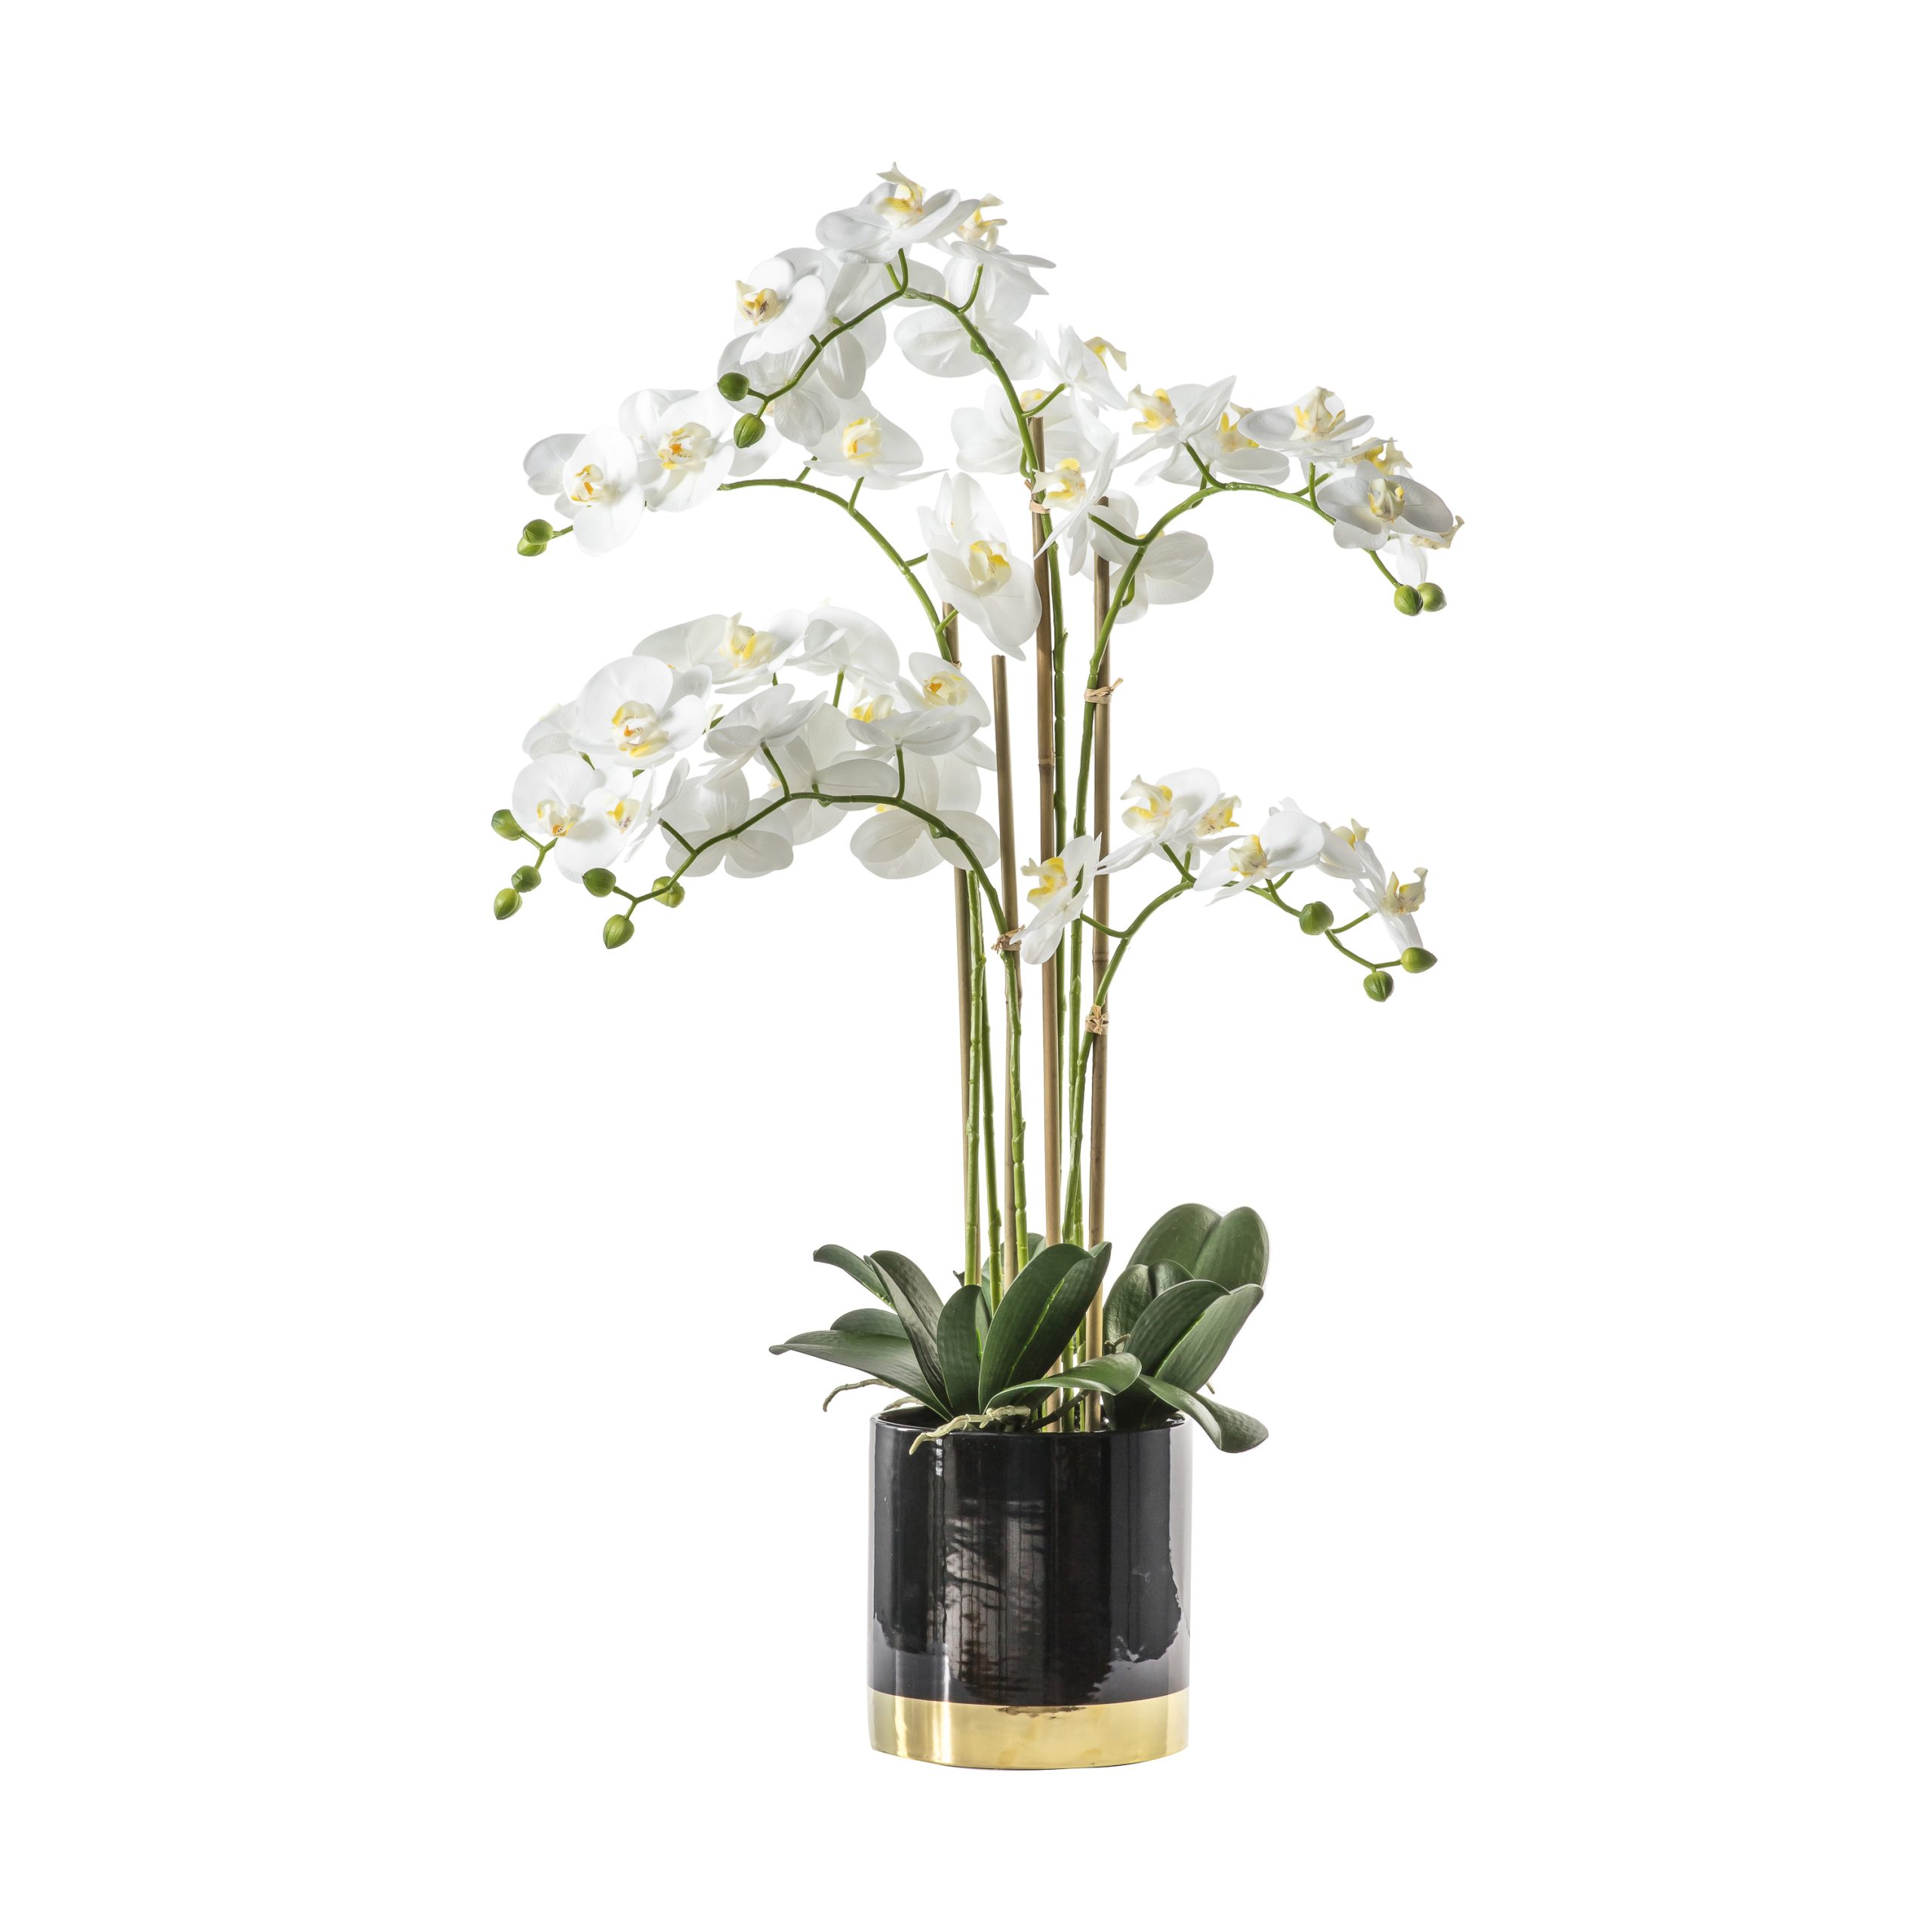 Gallery Direct Orchid White w/Black Gold Pot